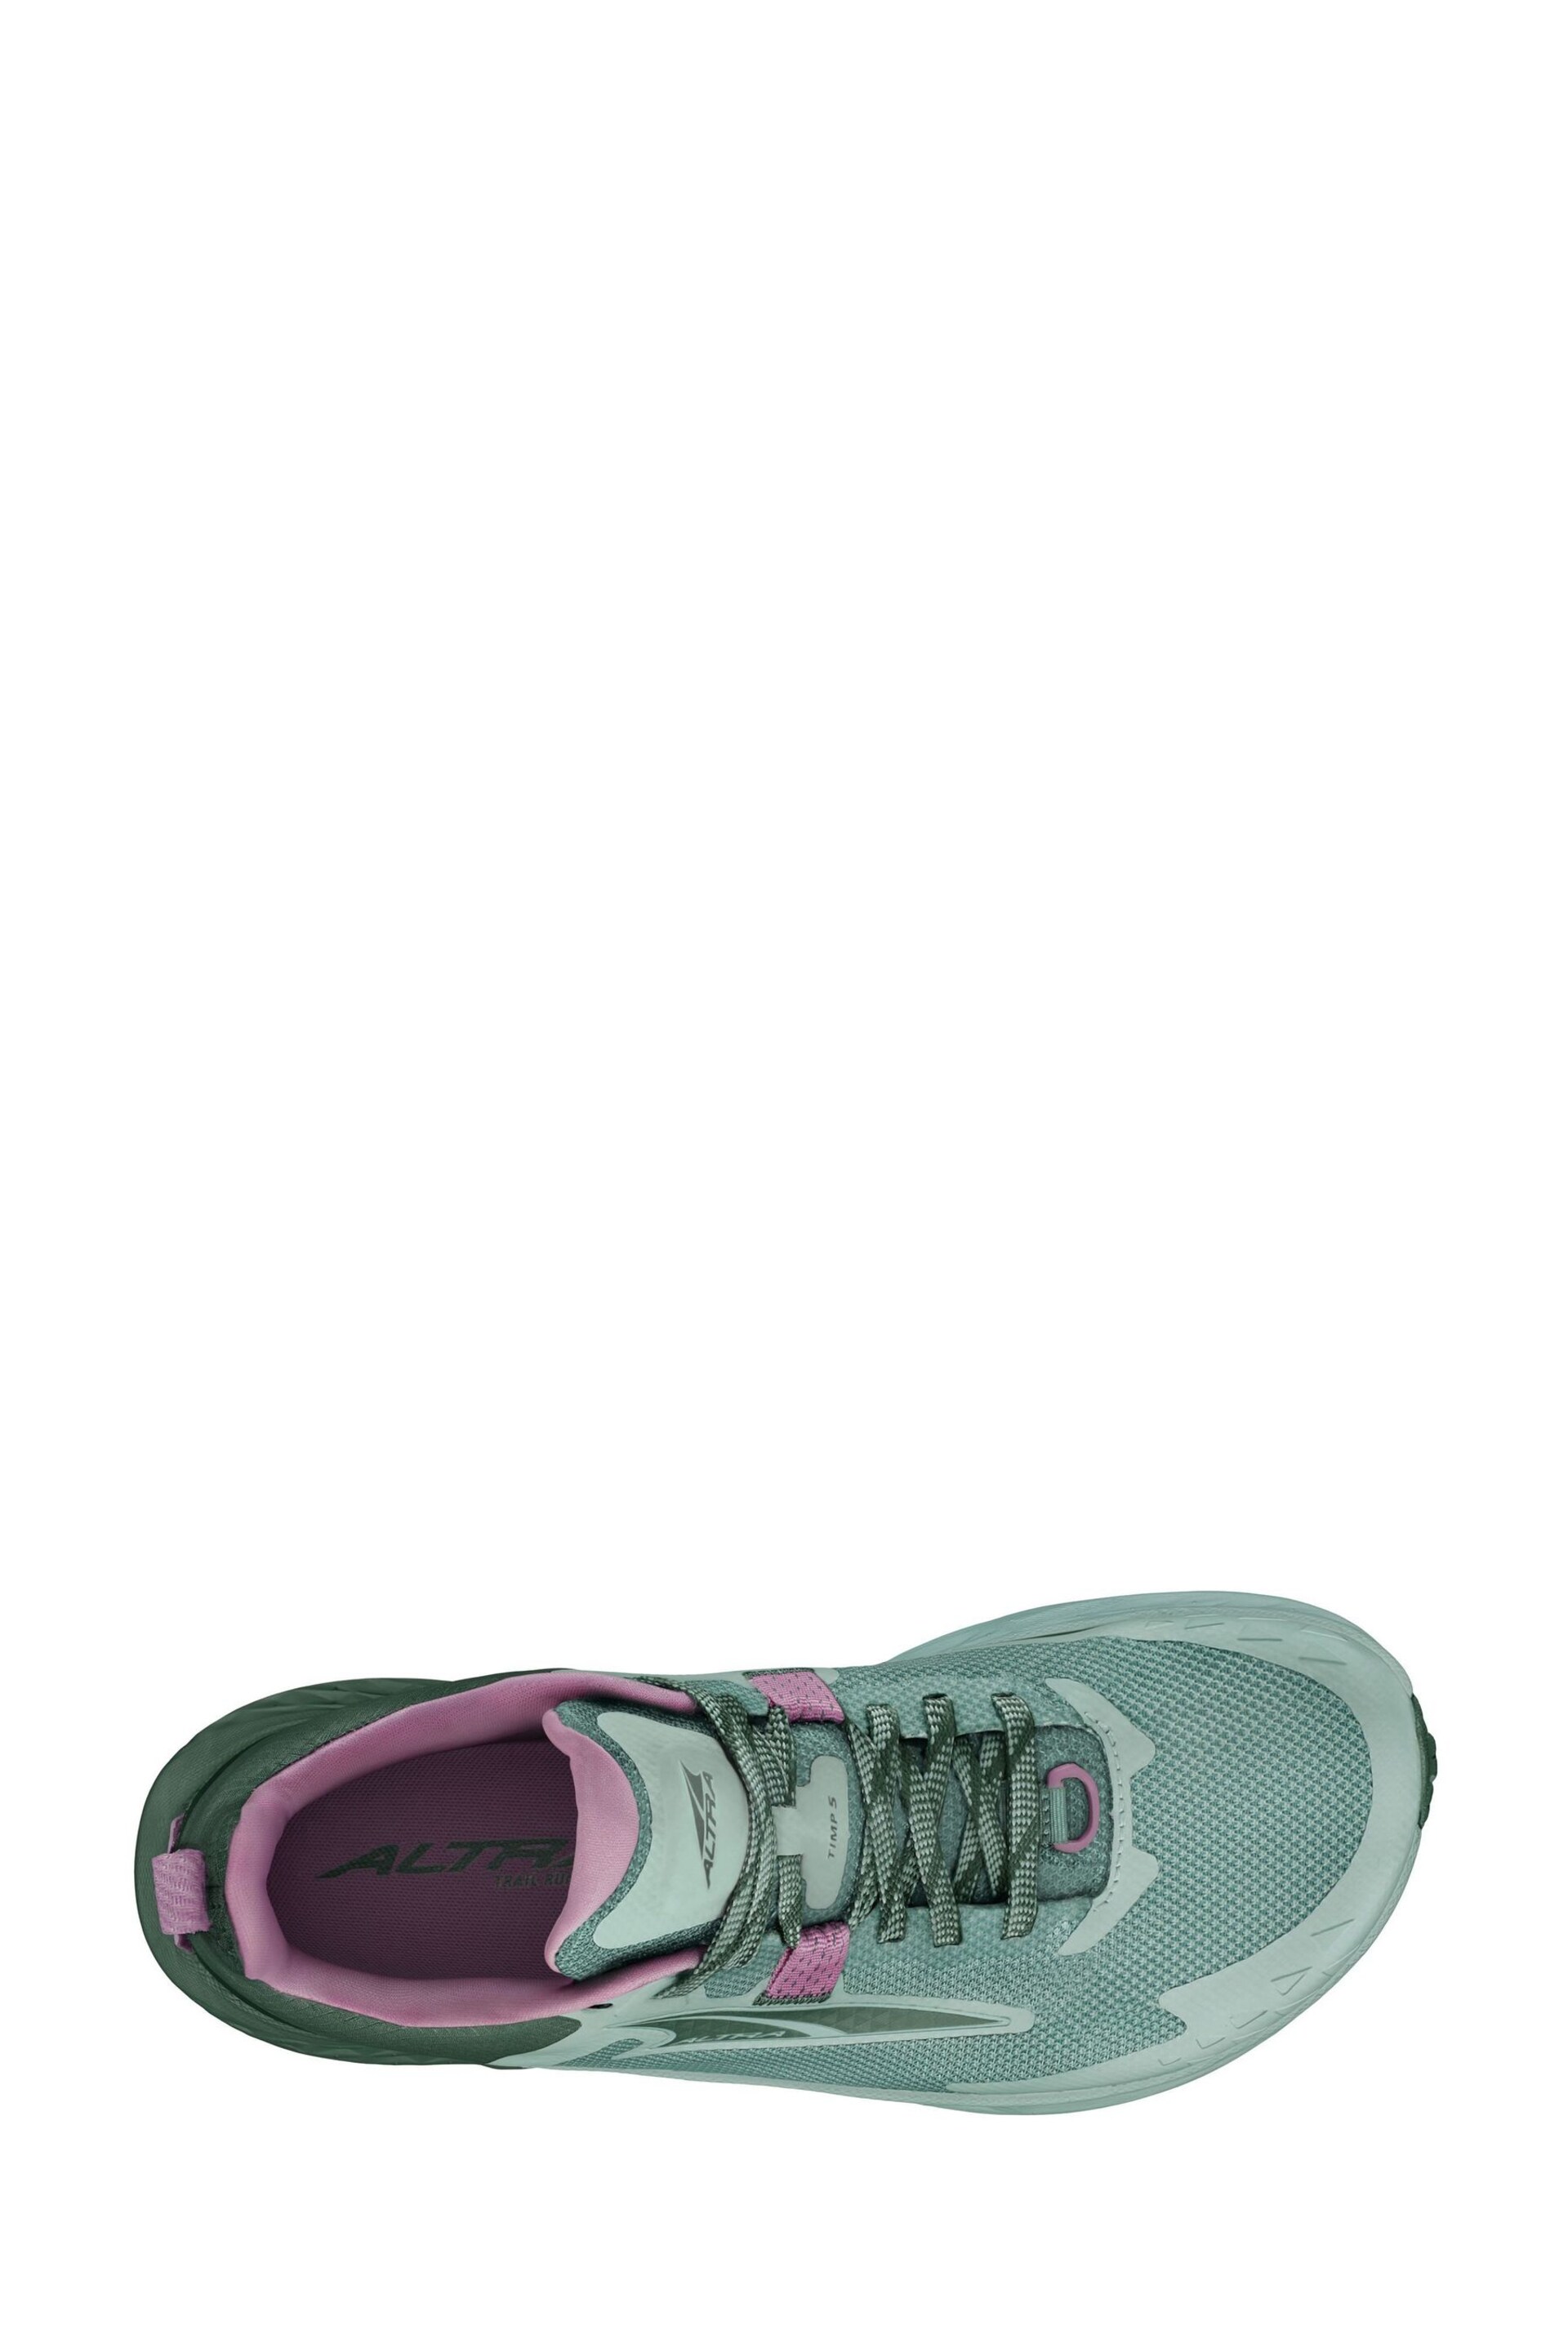 Altra Women's Timp 5 Trainers - Image 3 of 4